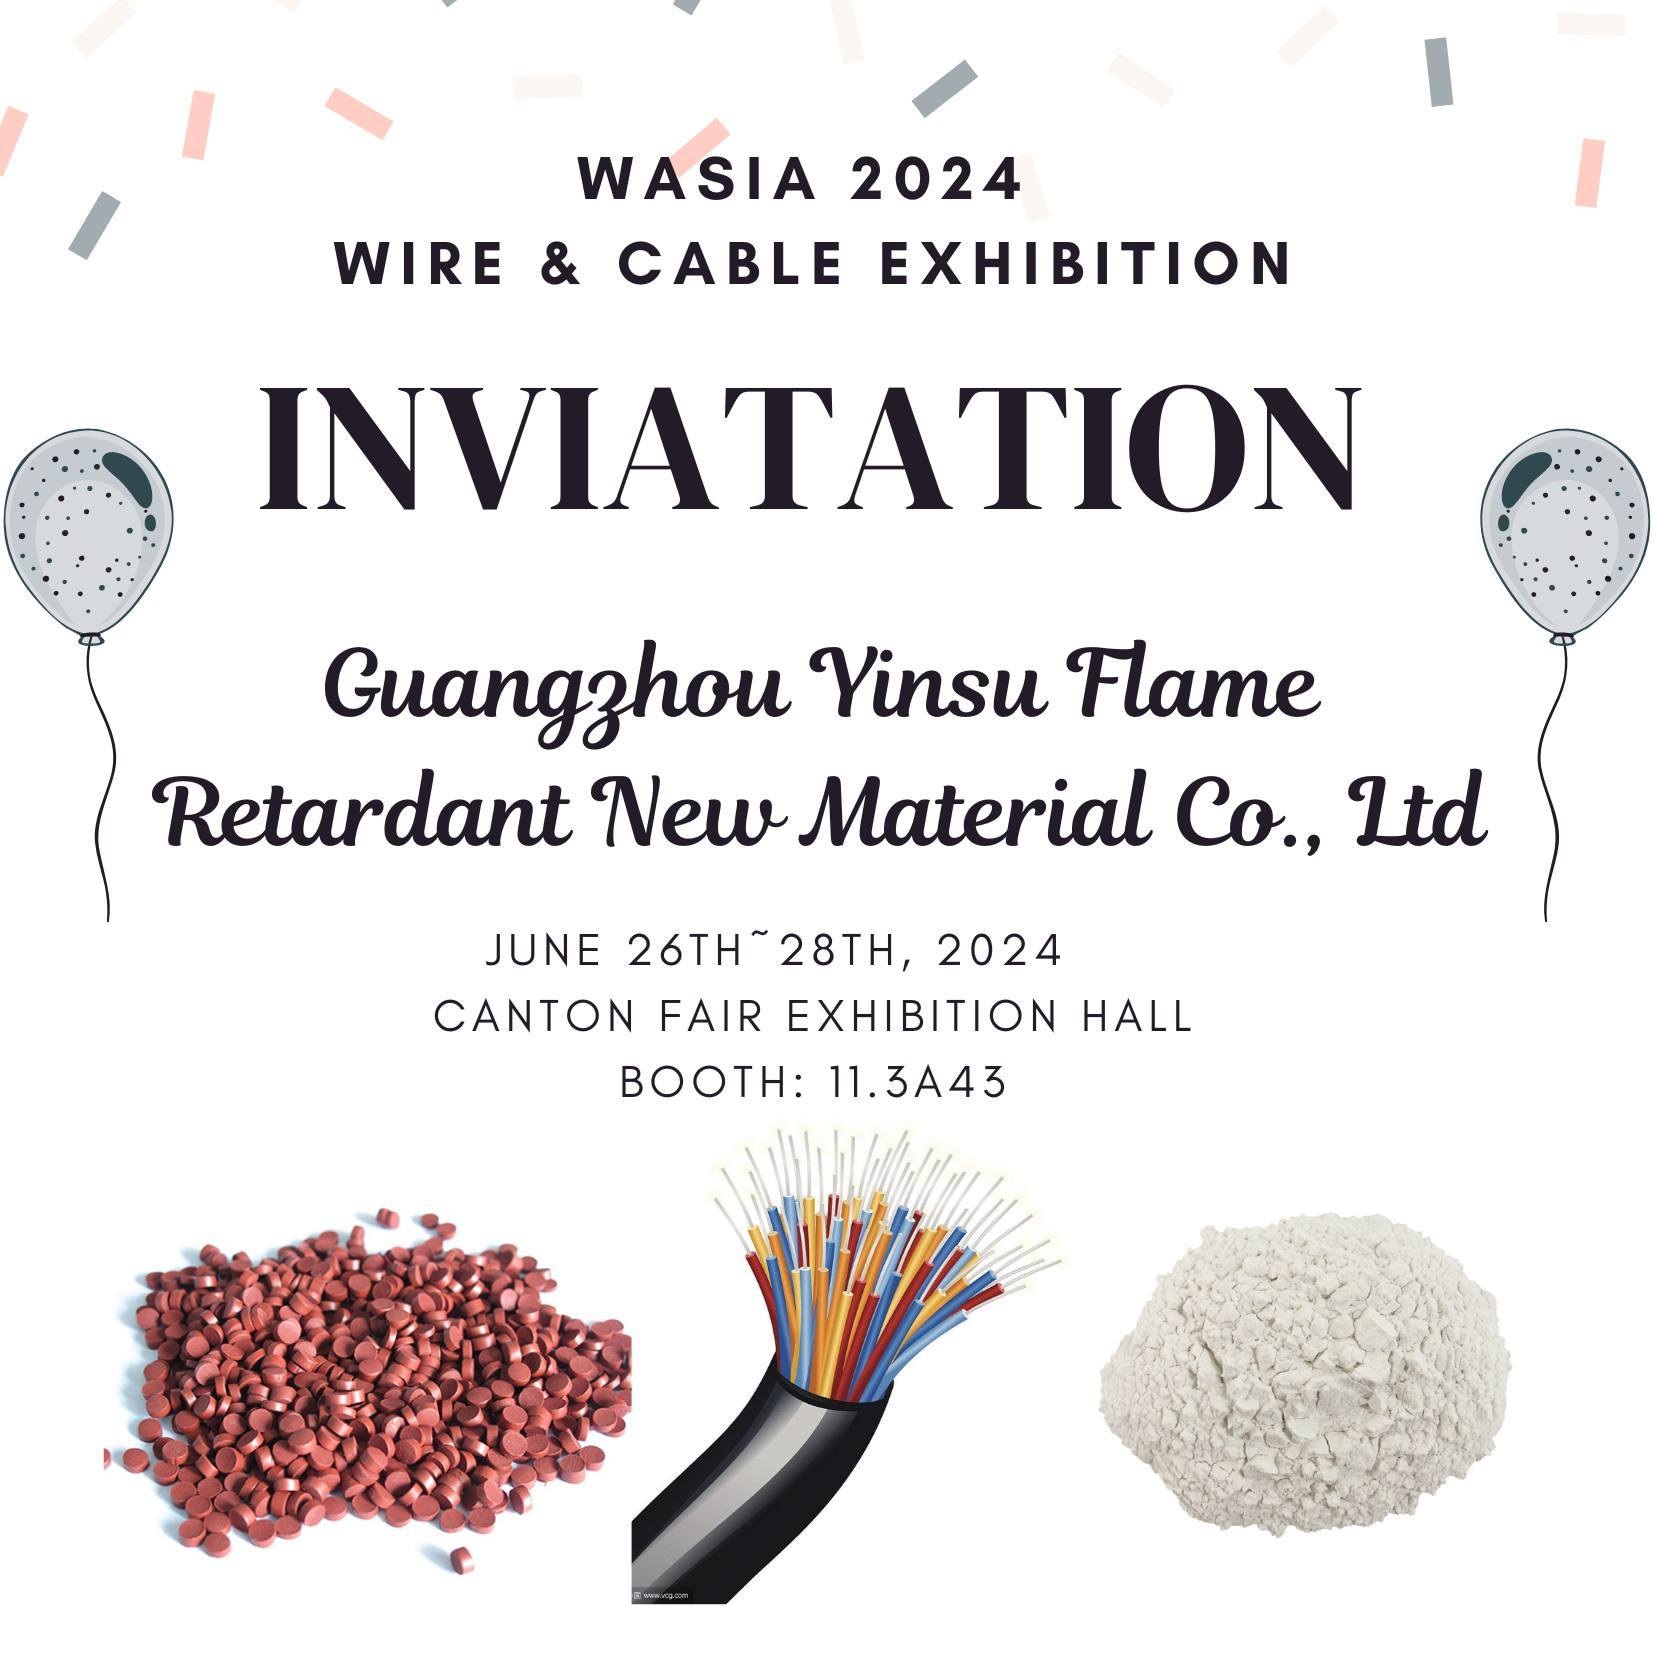 YINSU Flame Retardant: Invites You To The Asia Wire & Cable Exhibition!